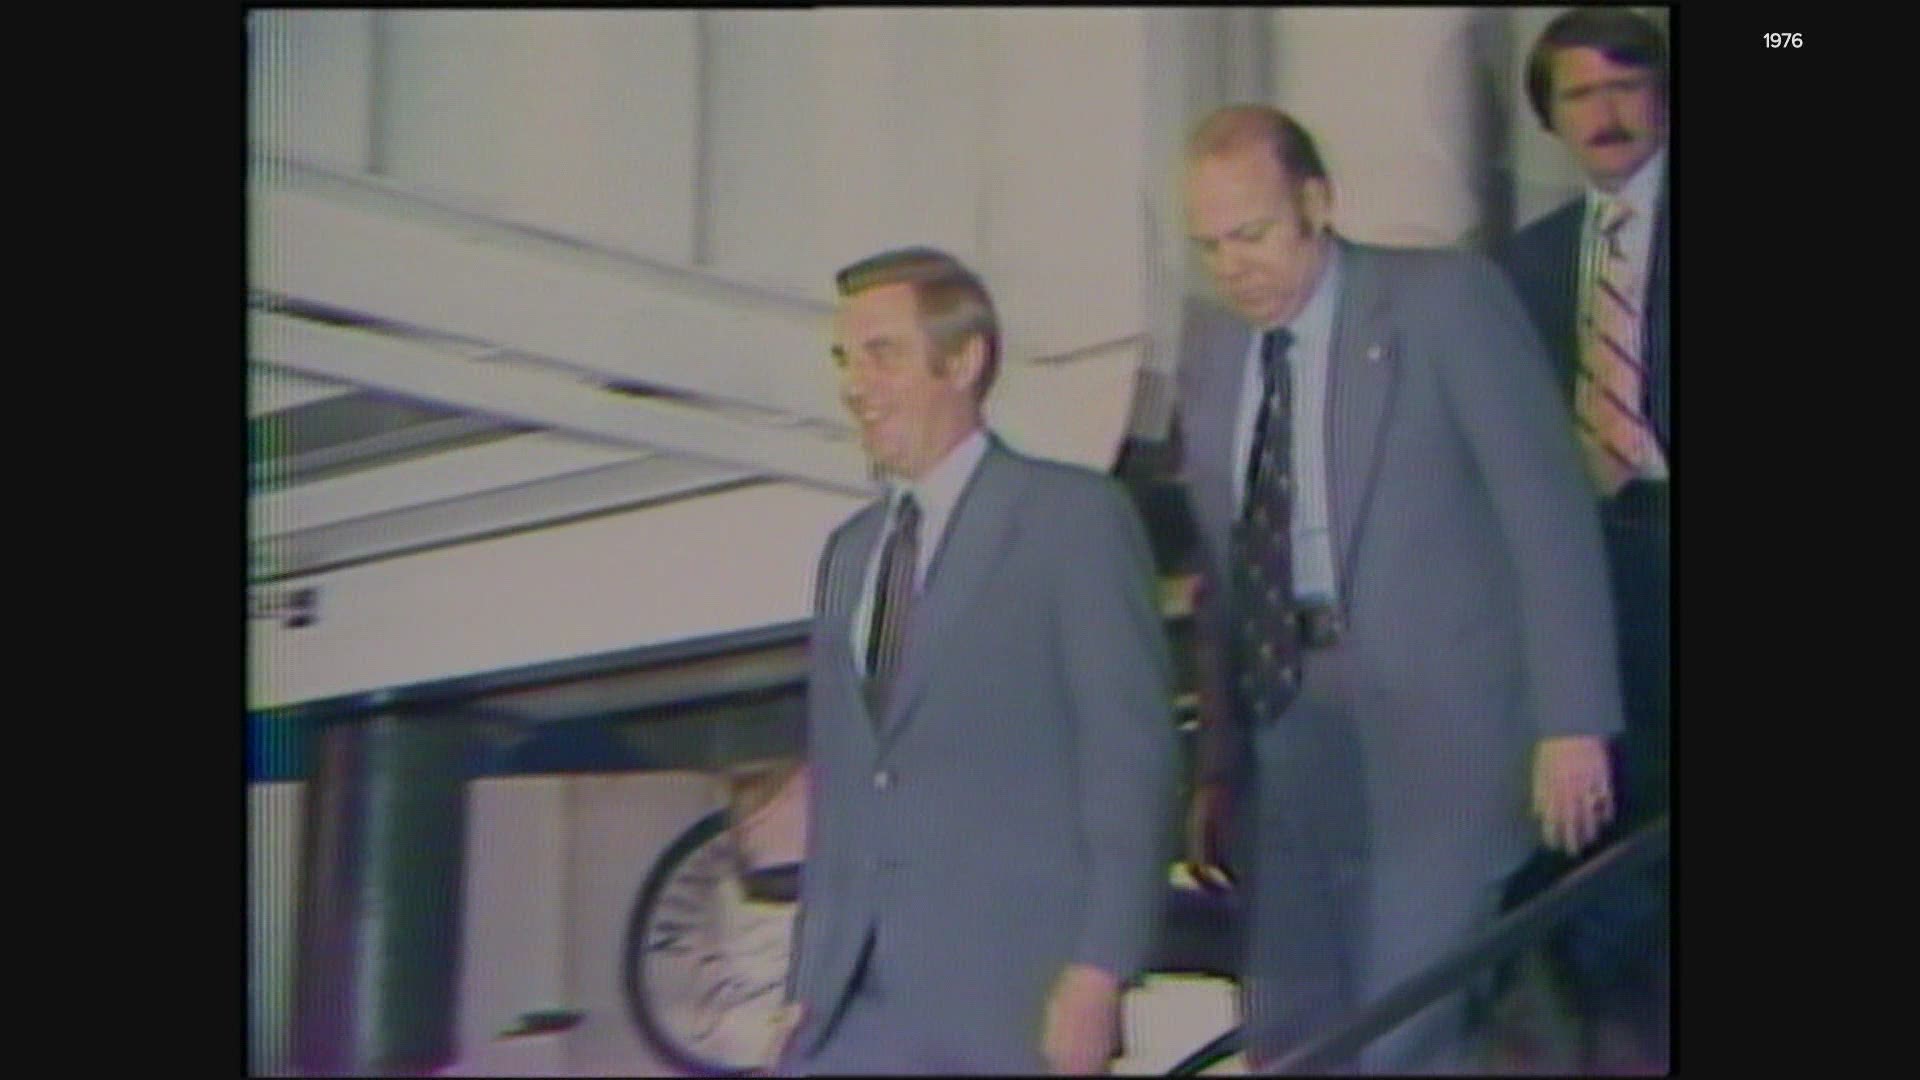 After Walter Mondale’s passing, KGW looks back to 1976 when he campaigned in Portland. Take a look in the Vault.